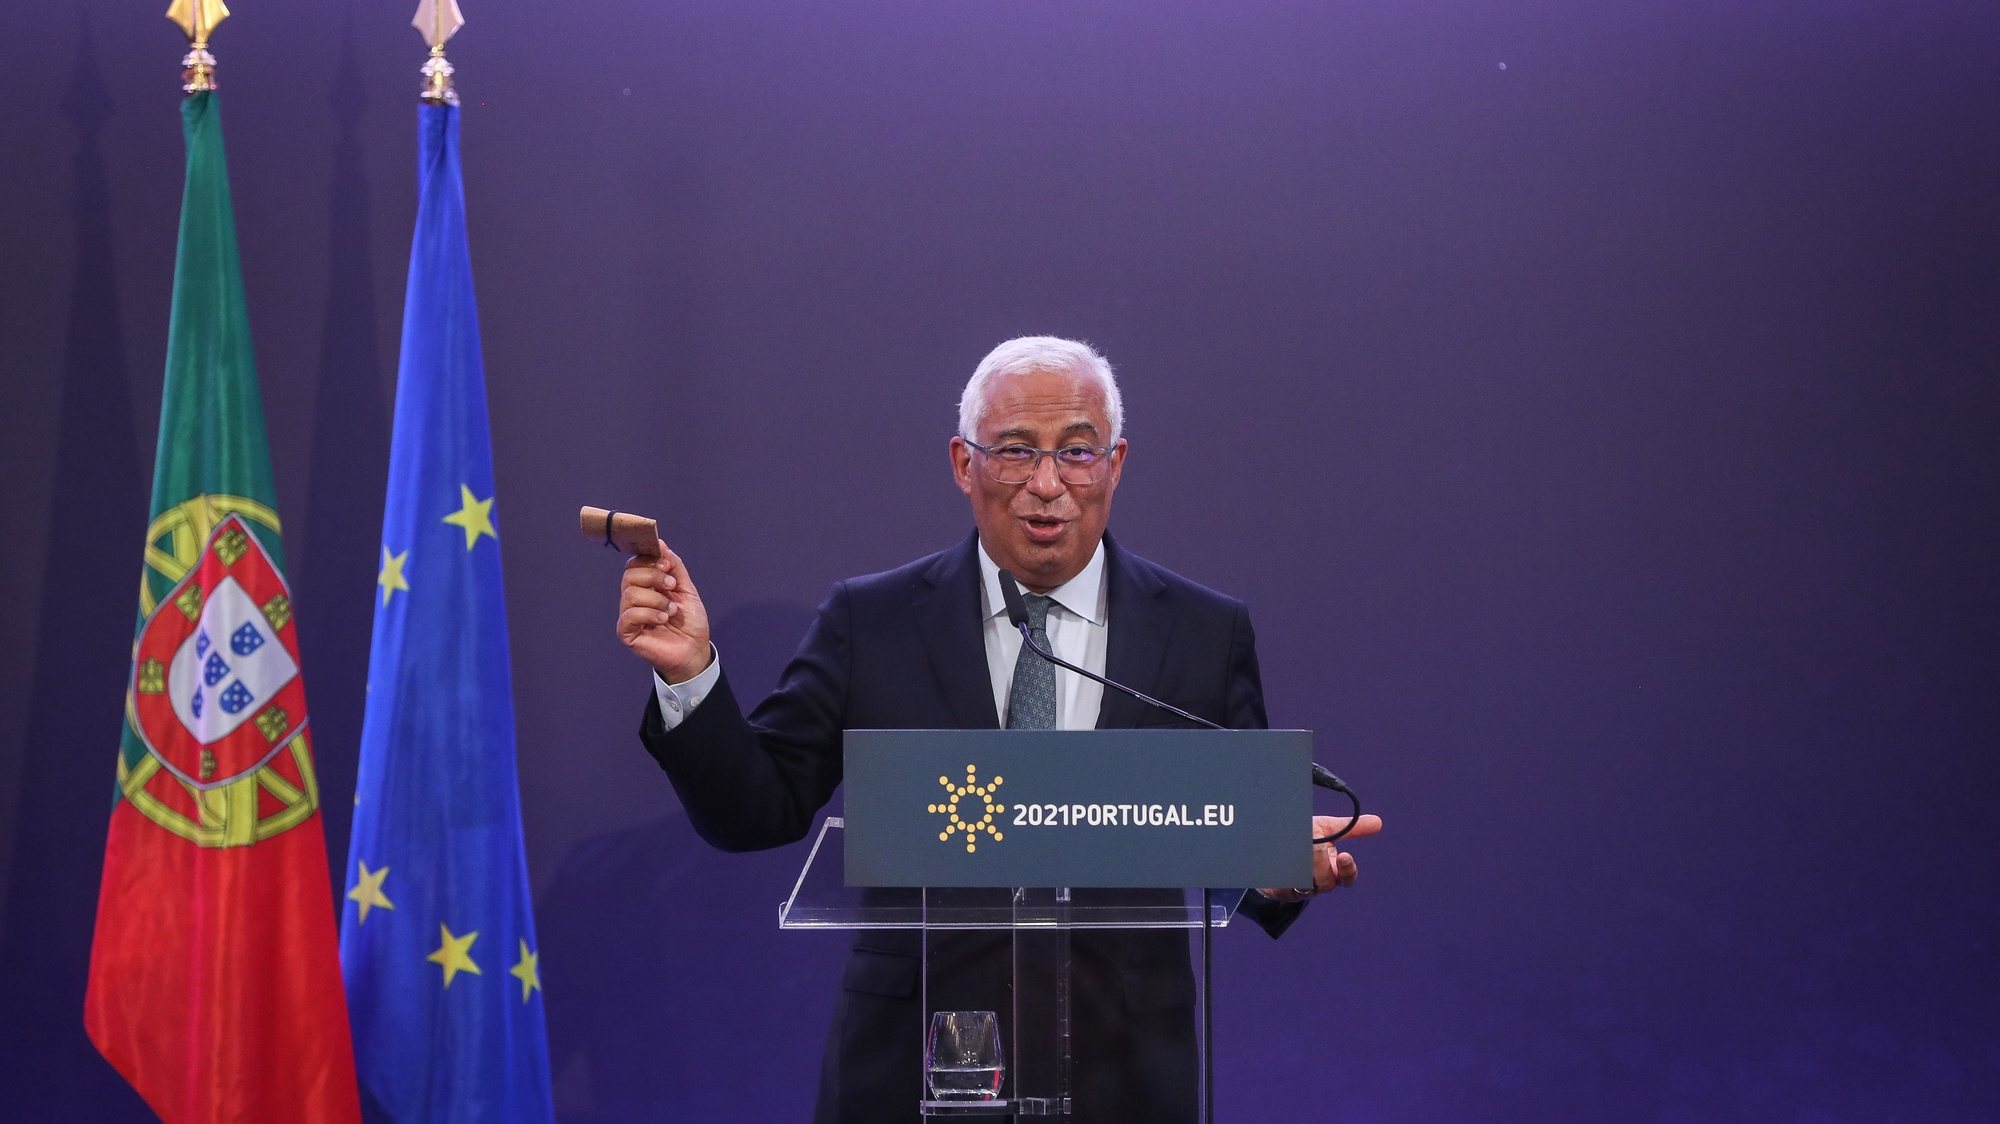 Portuguese Prime Minister, António Costa, shows a protective cork mask carrier during the press conference at the end of the European Council meeting, at Centro Cultural de Belém, Lisbon, March 25, 2021. MÁRIO CRUZ/LUSA